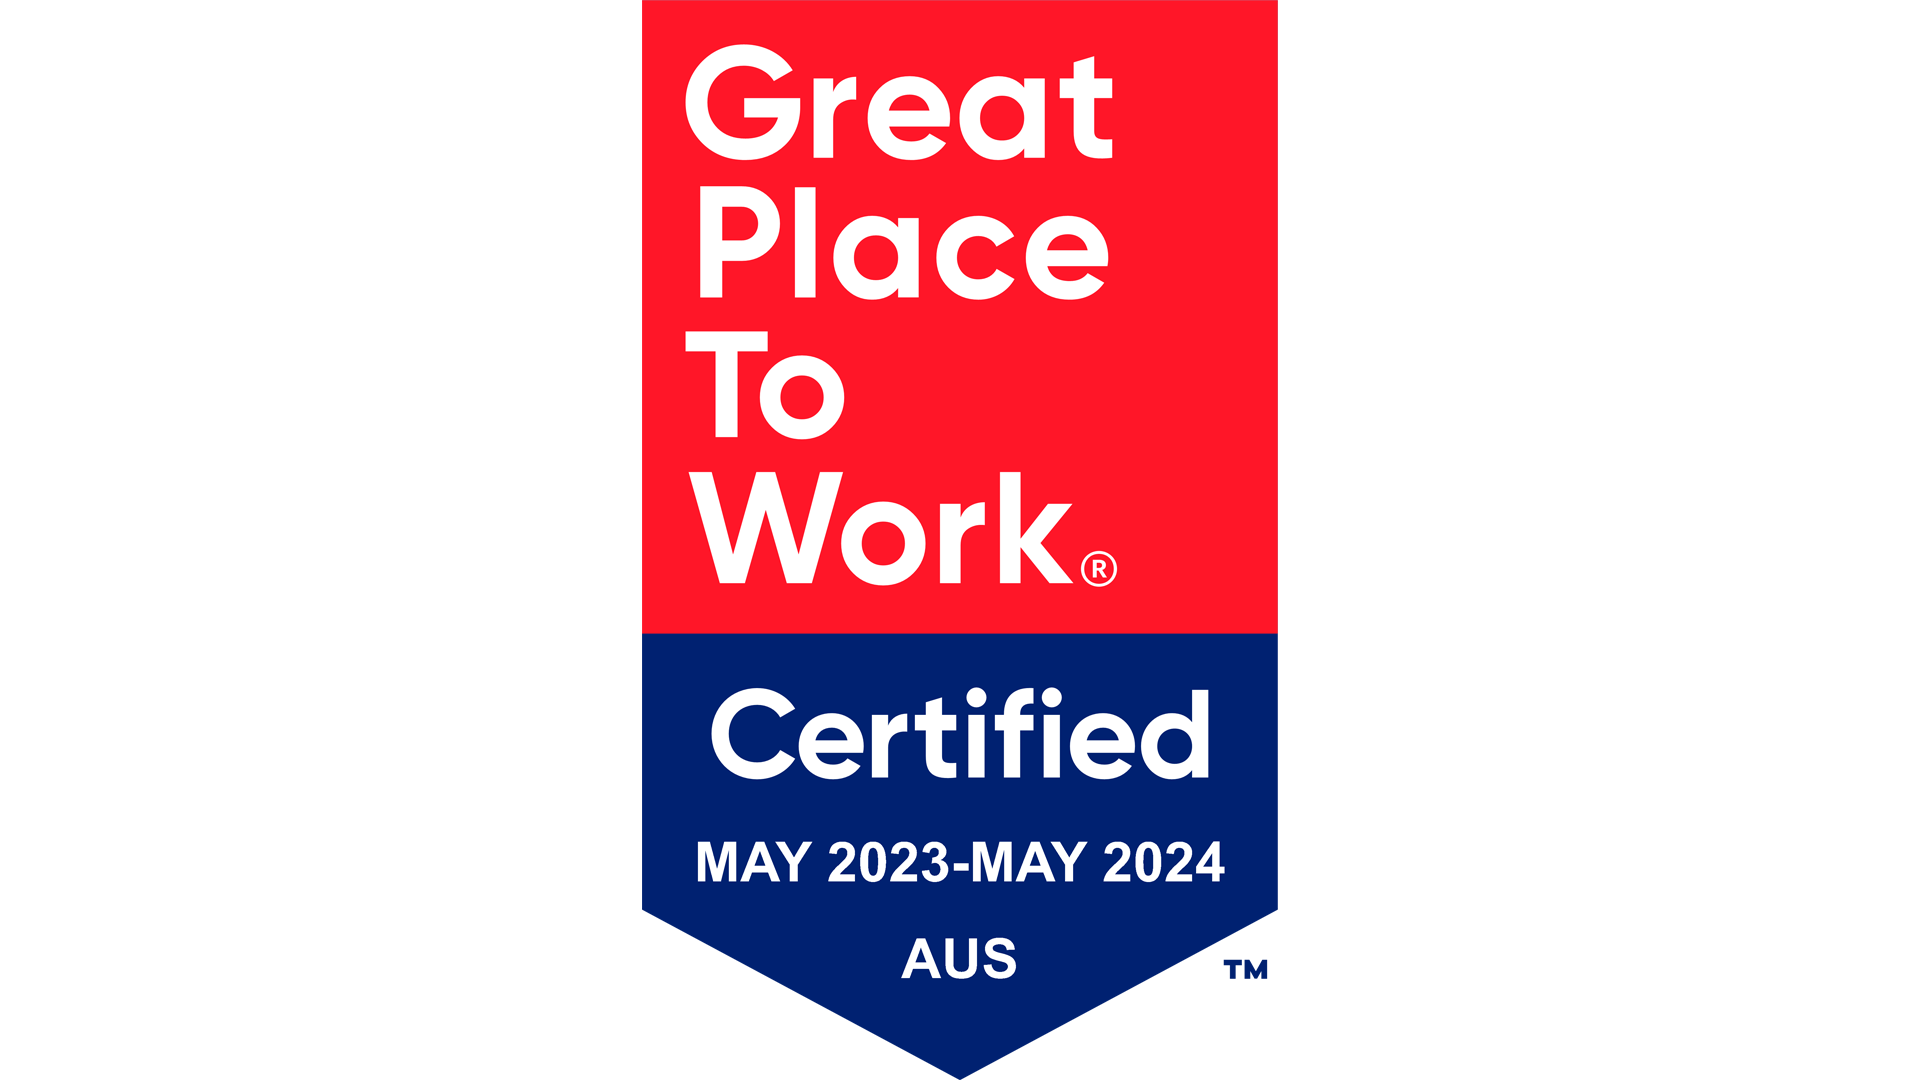 MakerX is now a certified 'Great Place to Work'